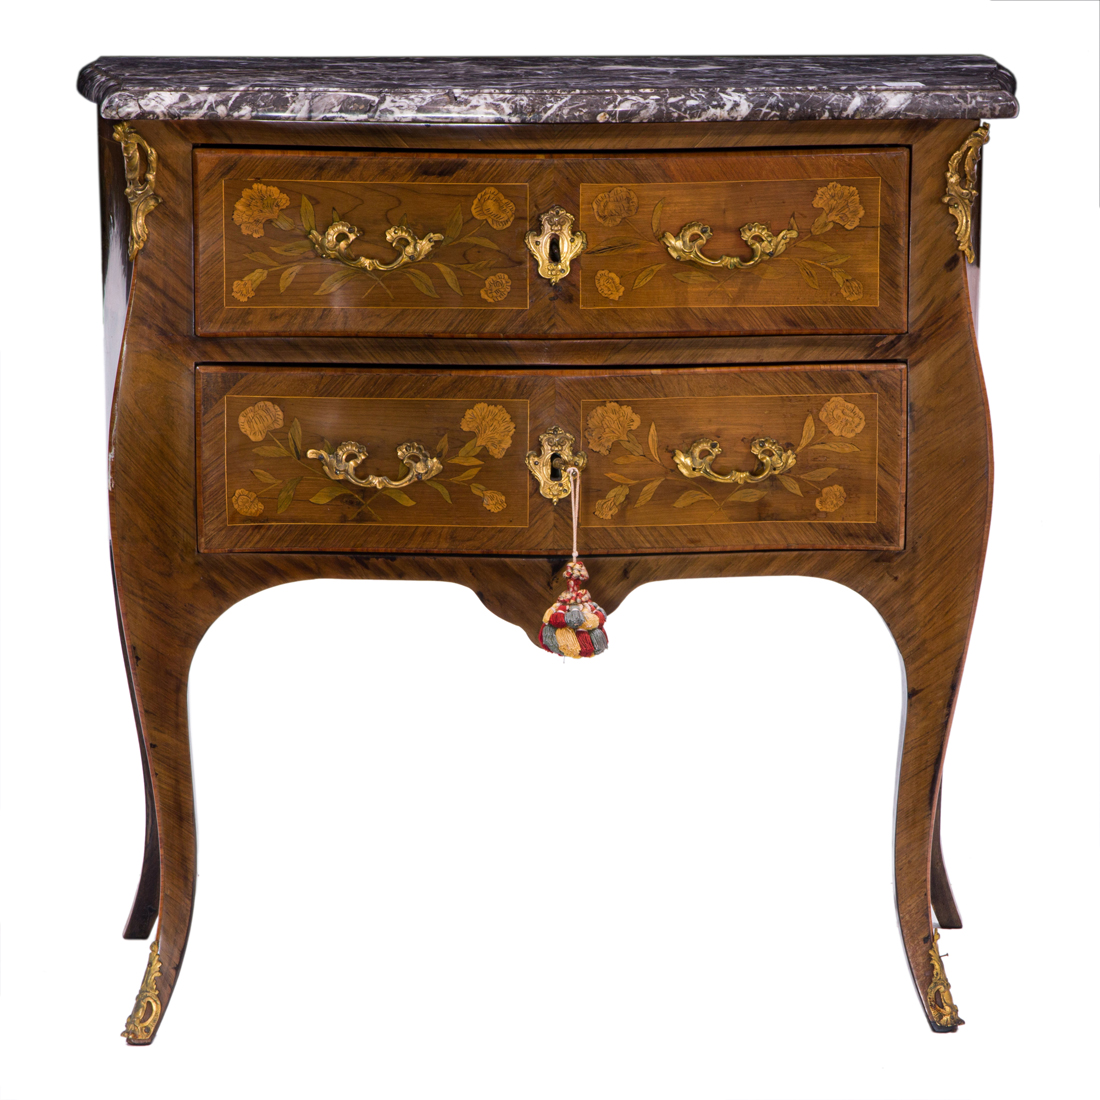 A LOUIS XV STYLE MARQUETRY DECORATED 2d0ebf